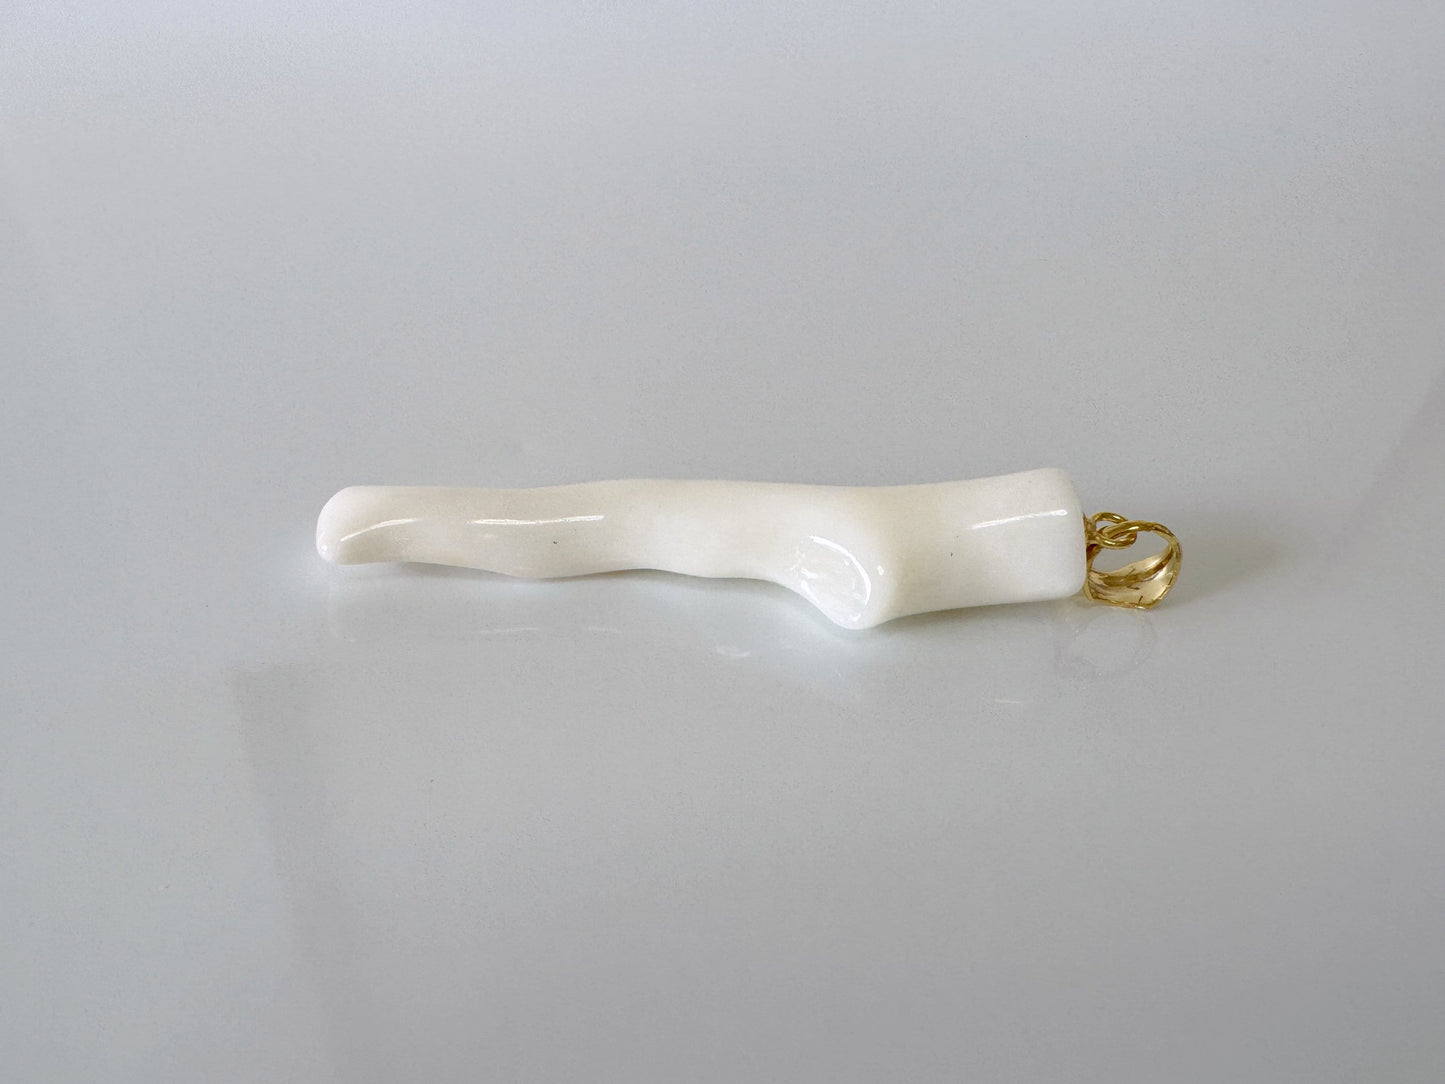 Natural White Coral Branch Pendant, Natural color, Japanese White Precious Coral, Silver Bail (gold-plated)